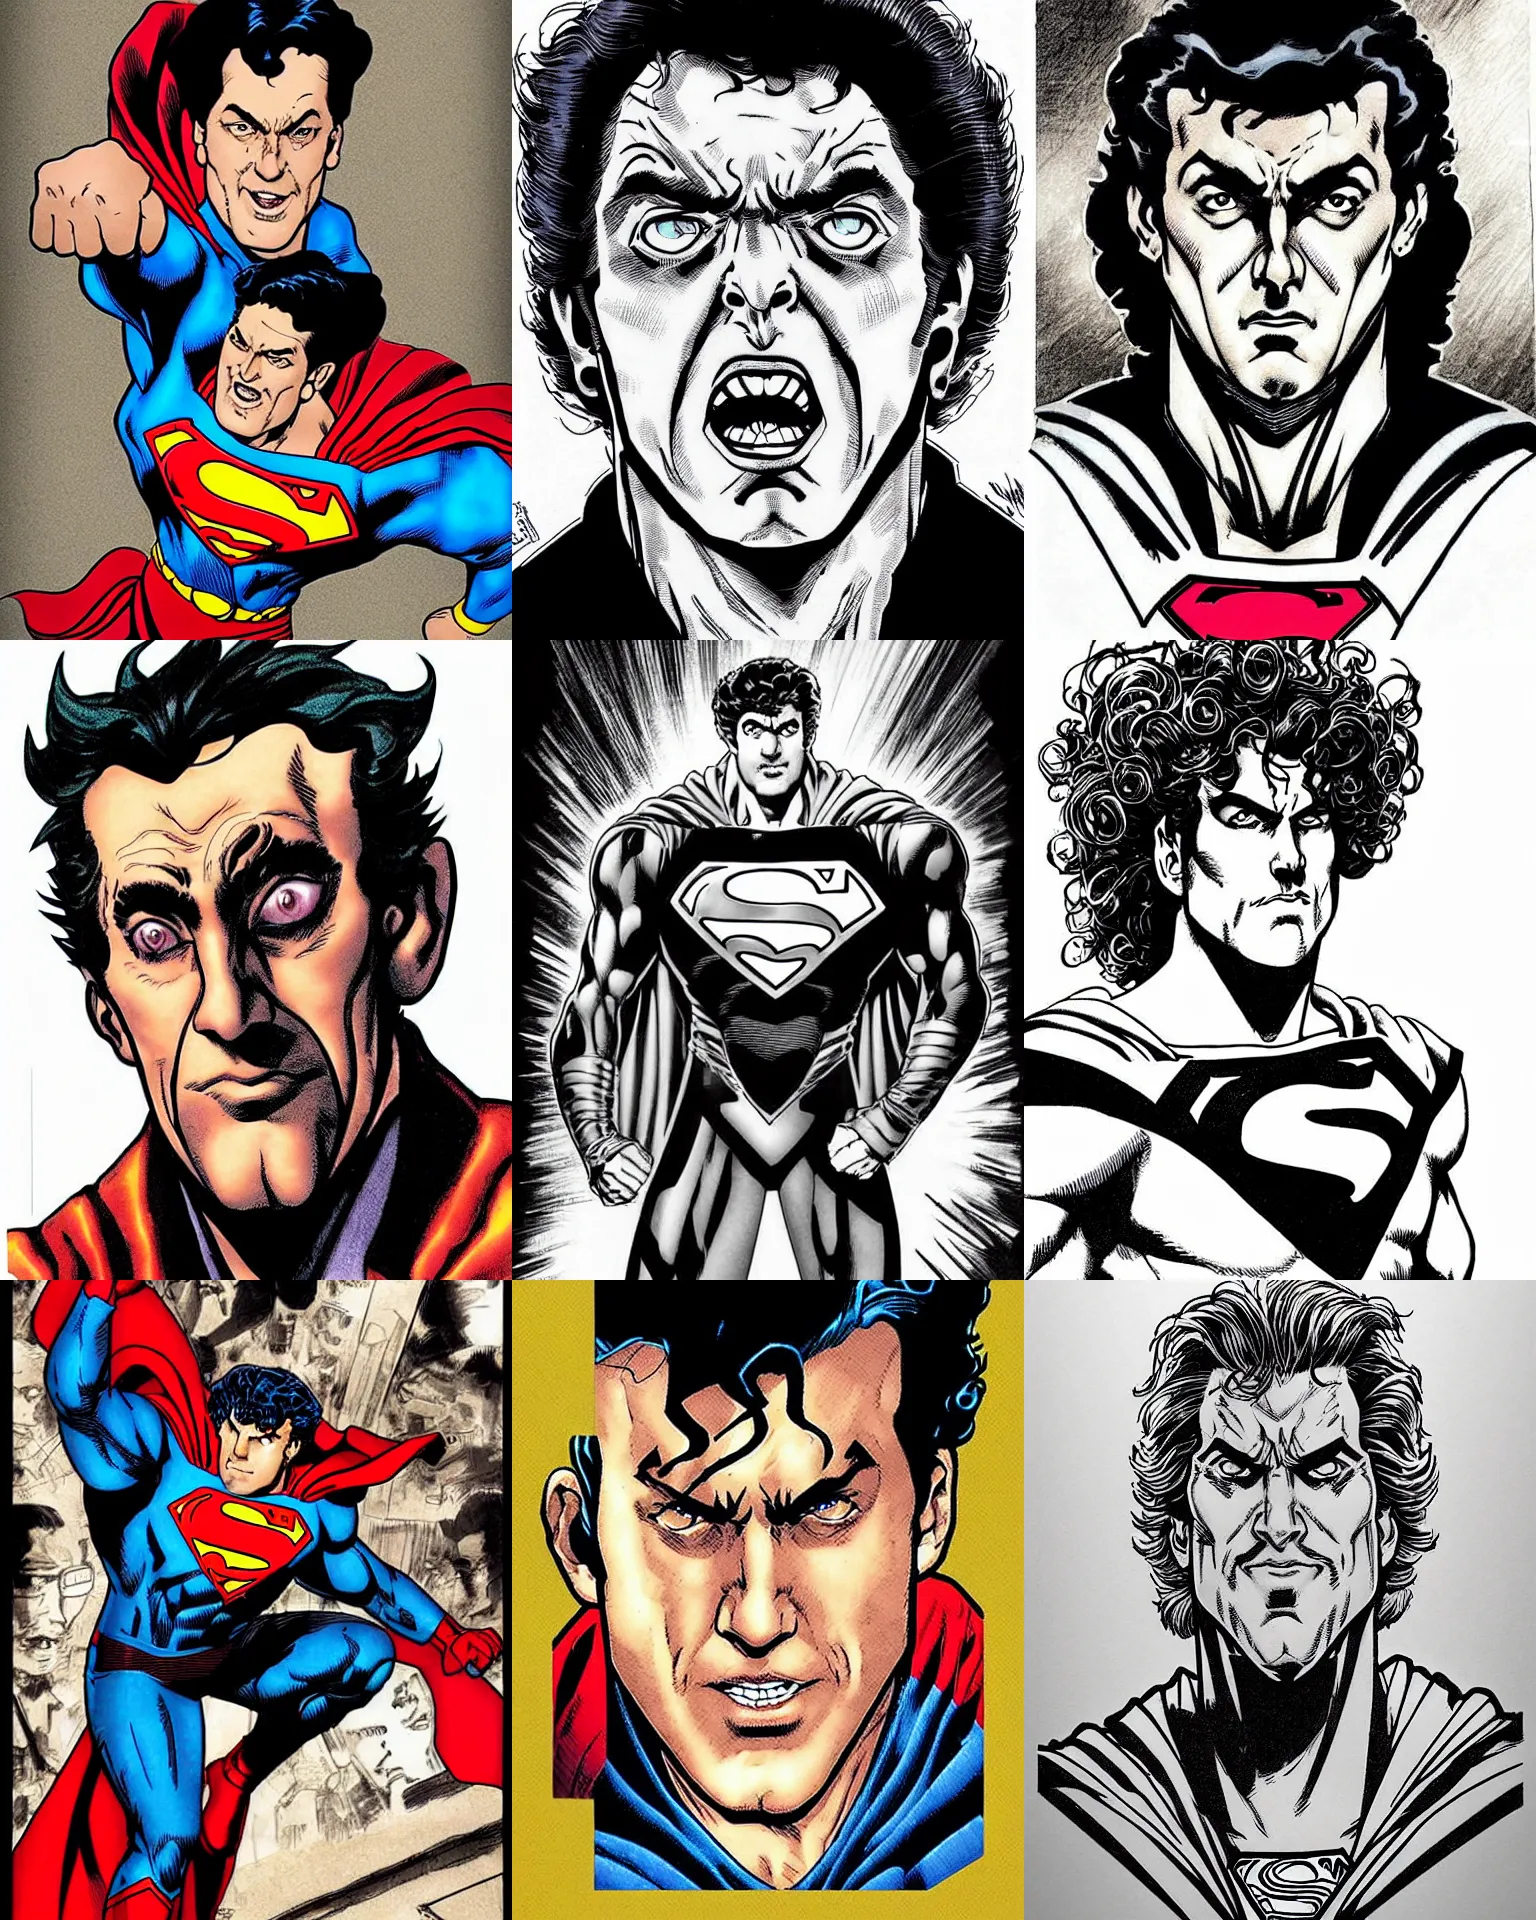 Prompt: vincent schiavelli!!! jim lee!!! flat ink sketch by jim lee face close up headshot superman costume in the style of jim lee, x - men superhero comic book character by jim lee